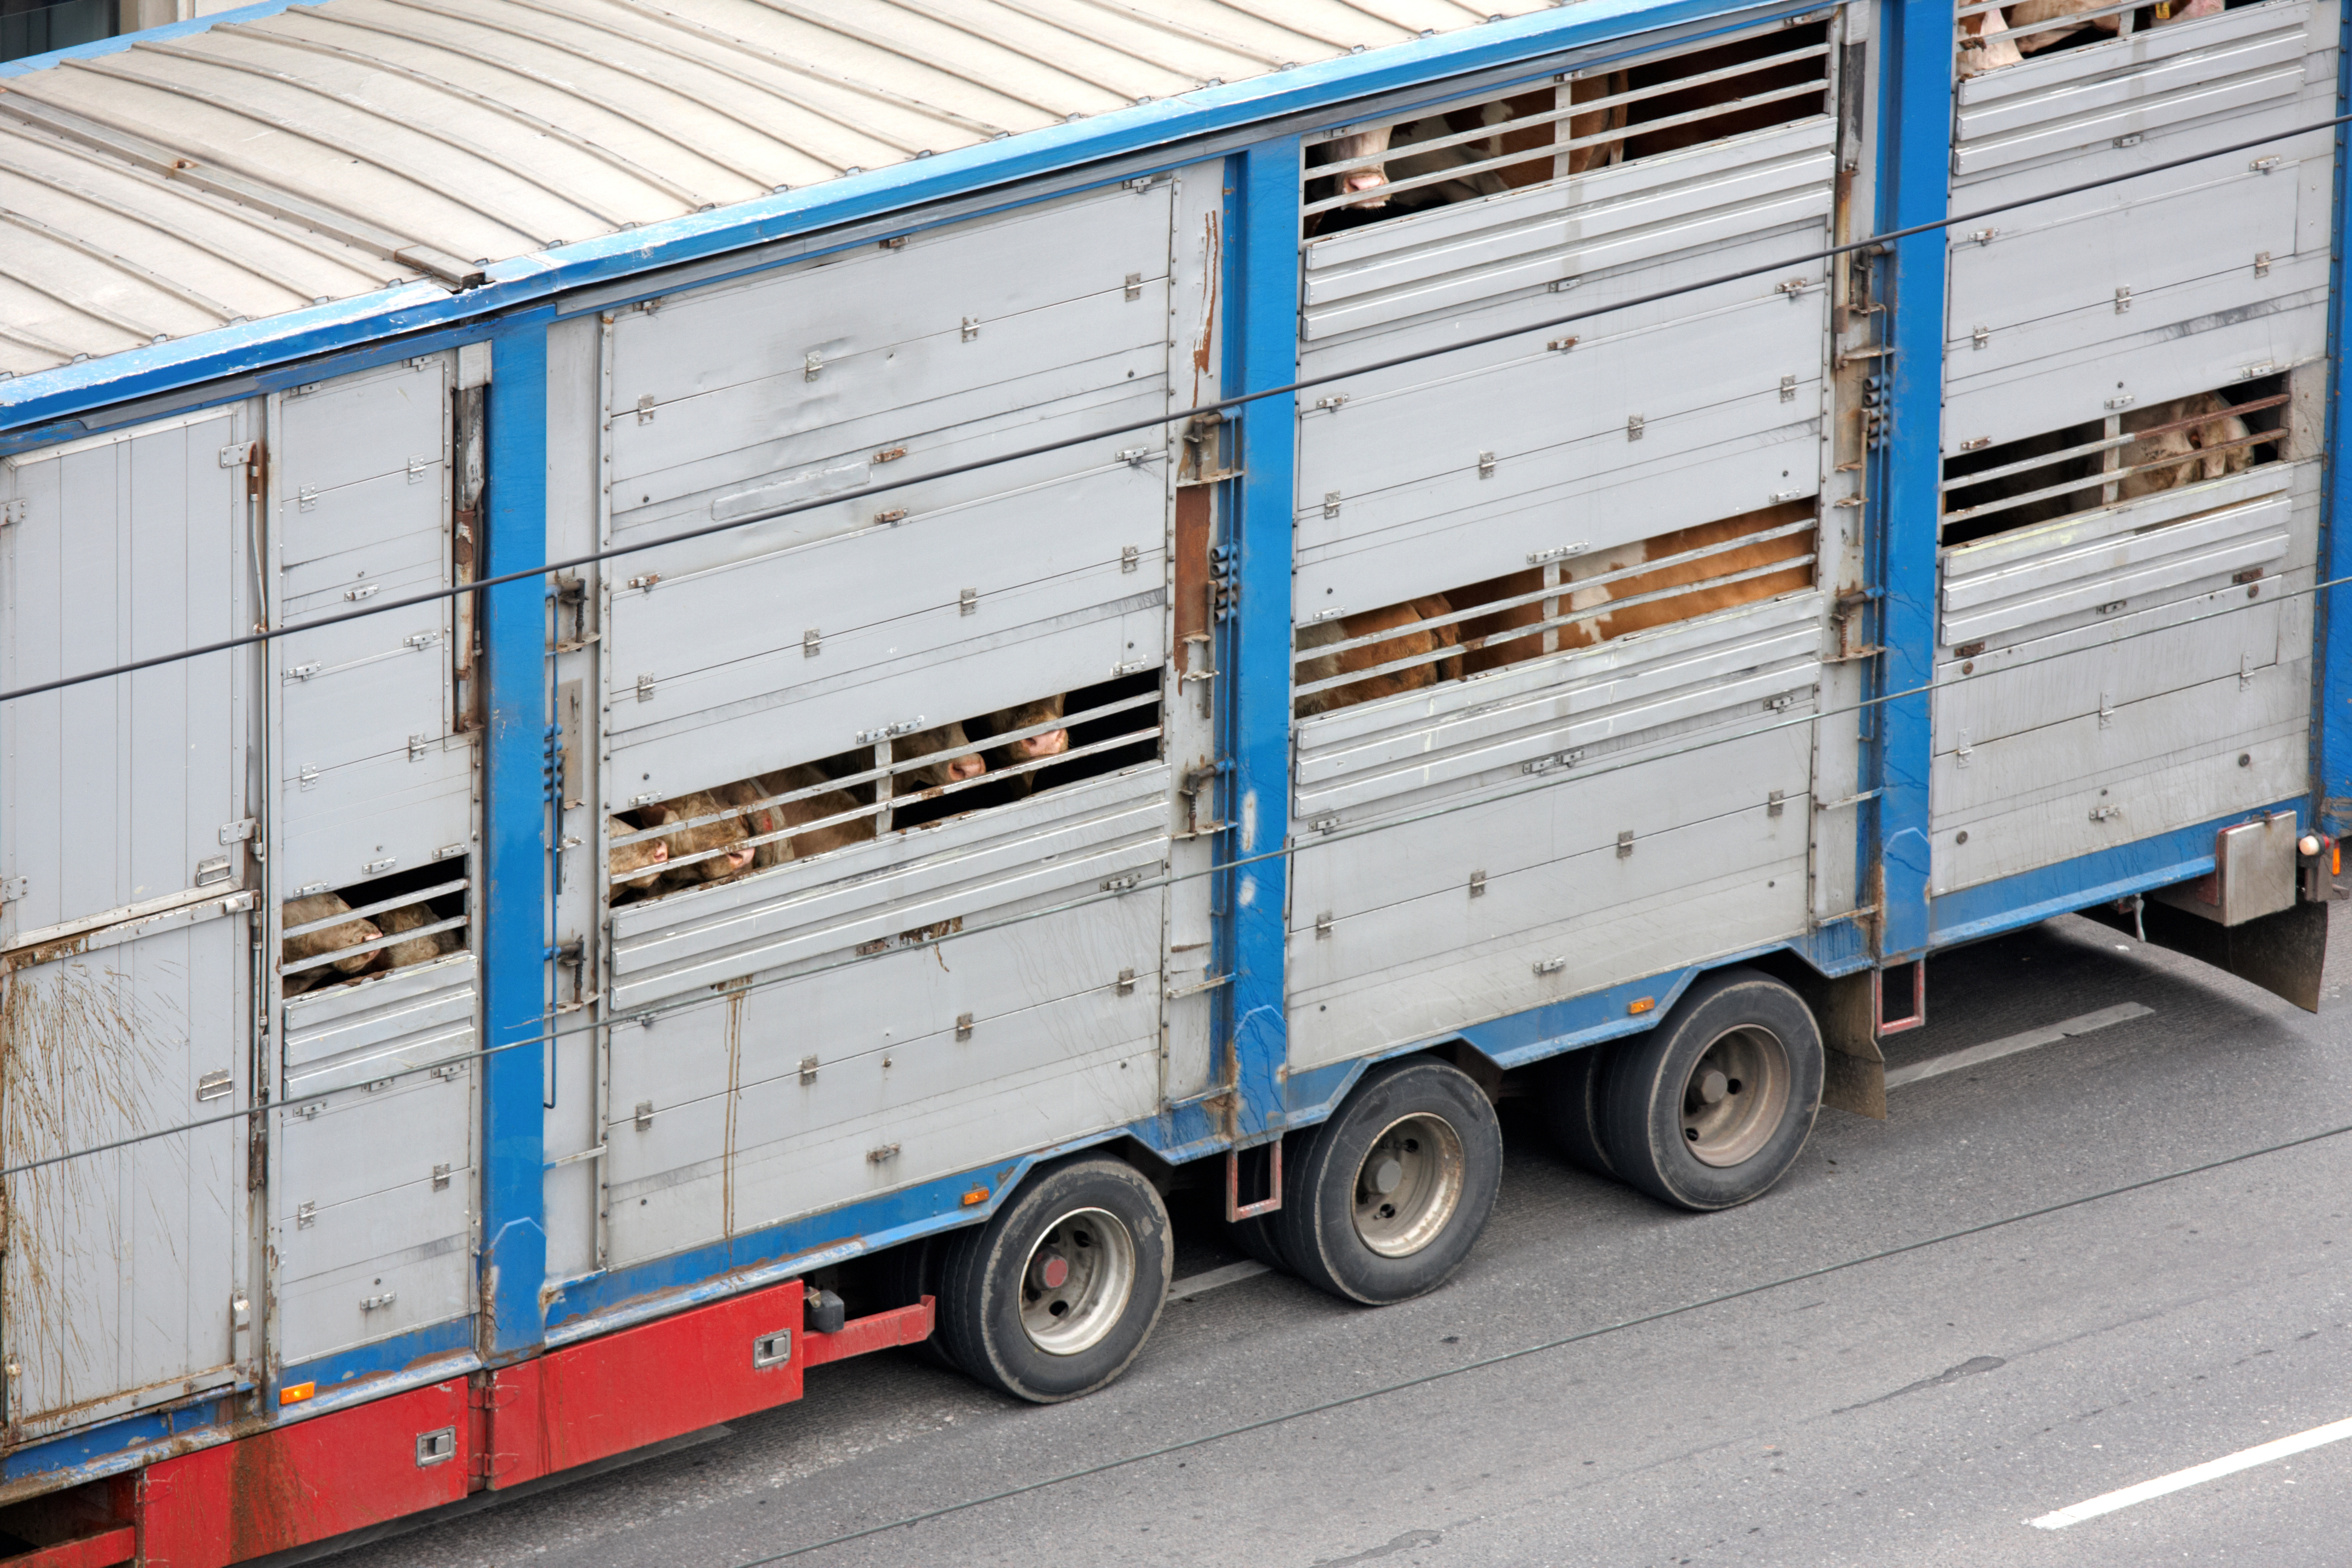 Cows on a transport truck to a factory farm.